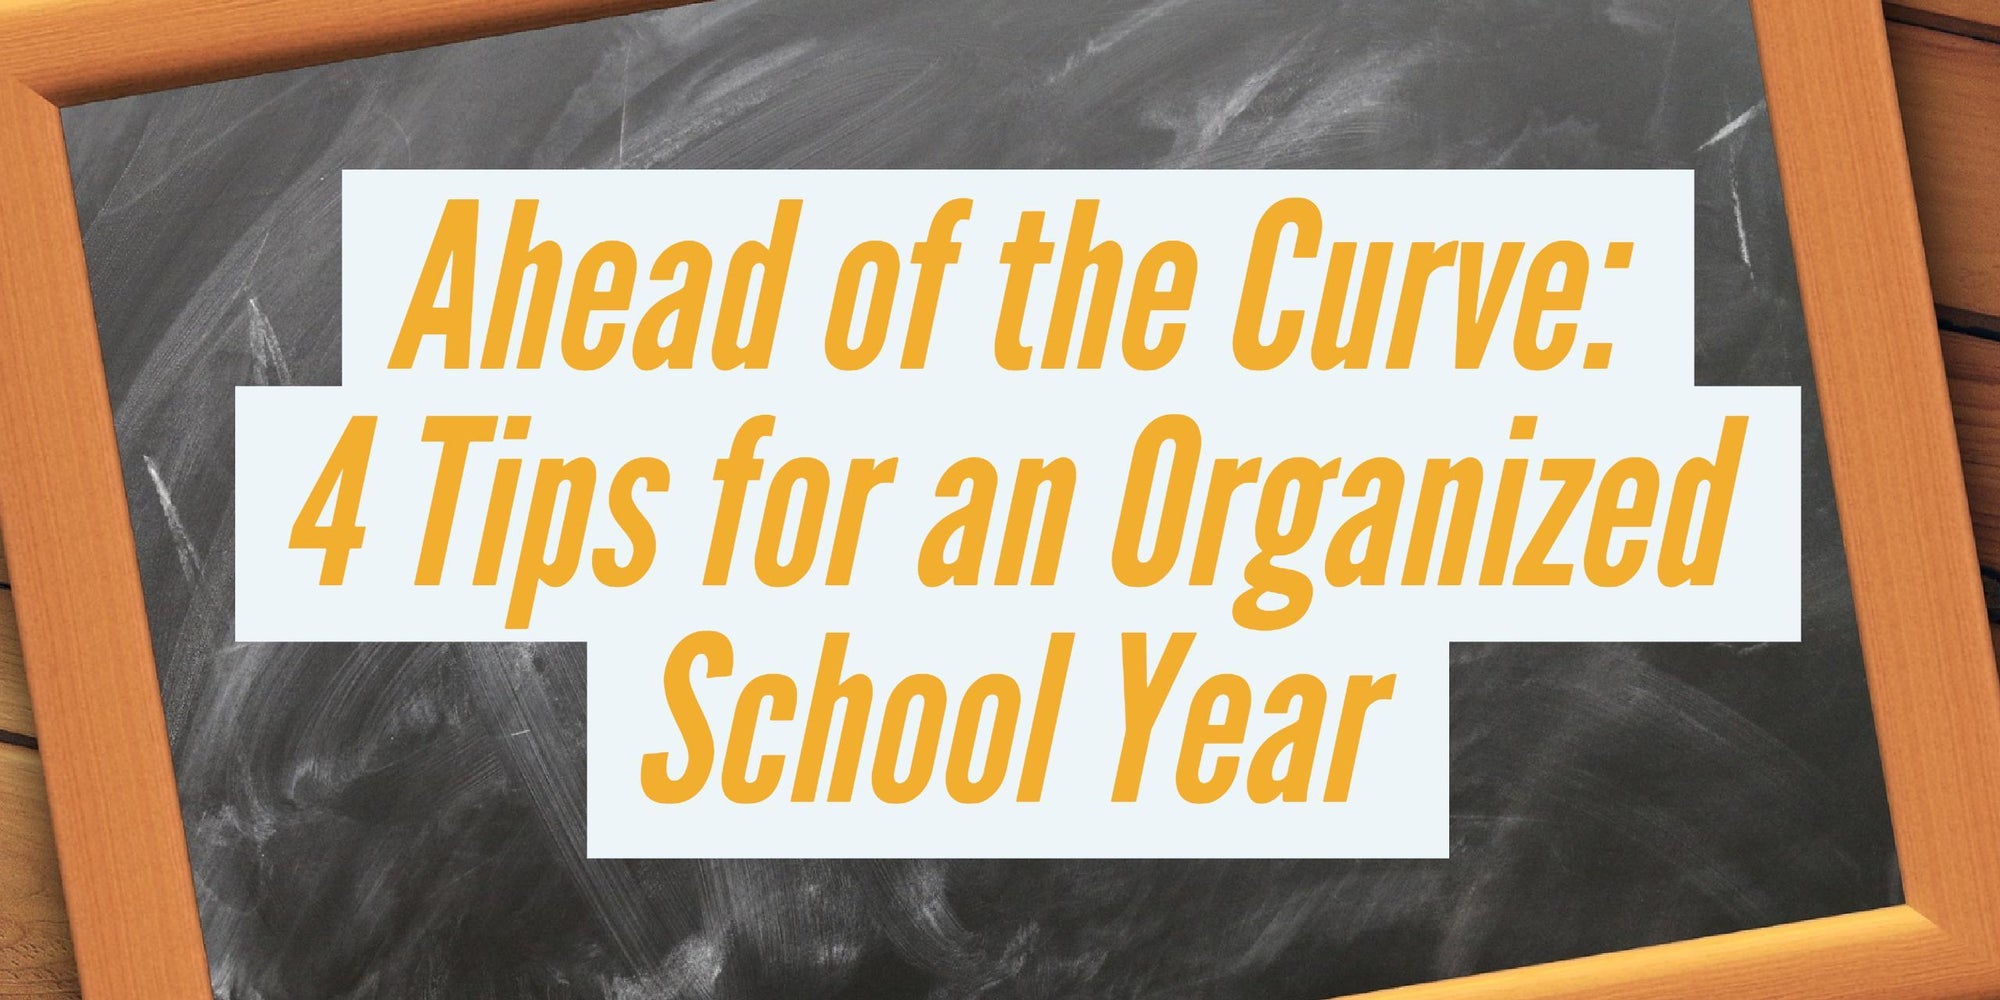 Ahead of the Curve: 4 Tips for an Organized School Year